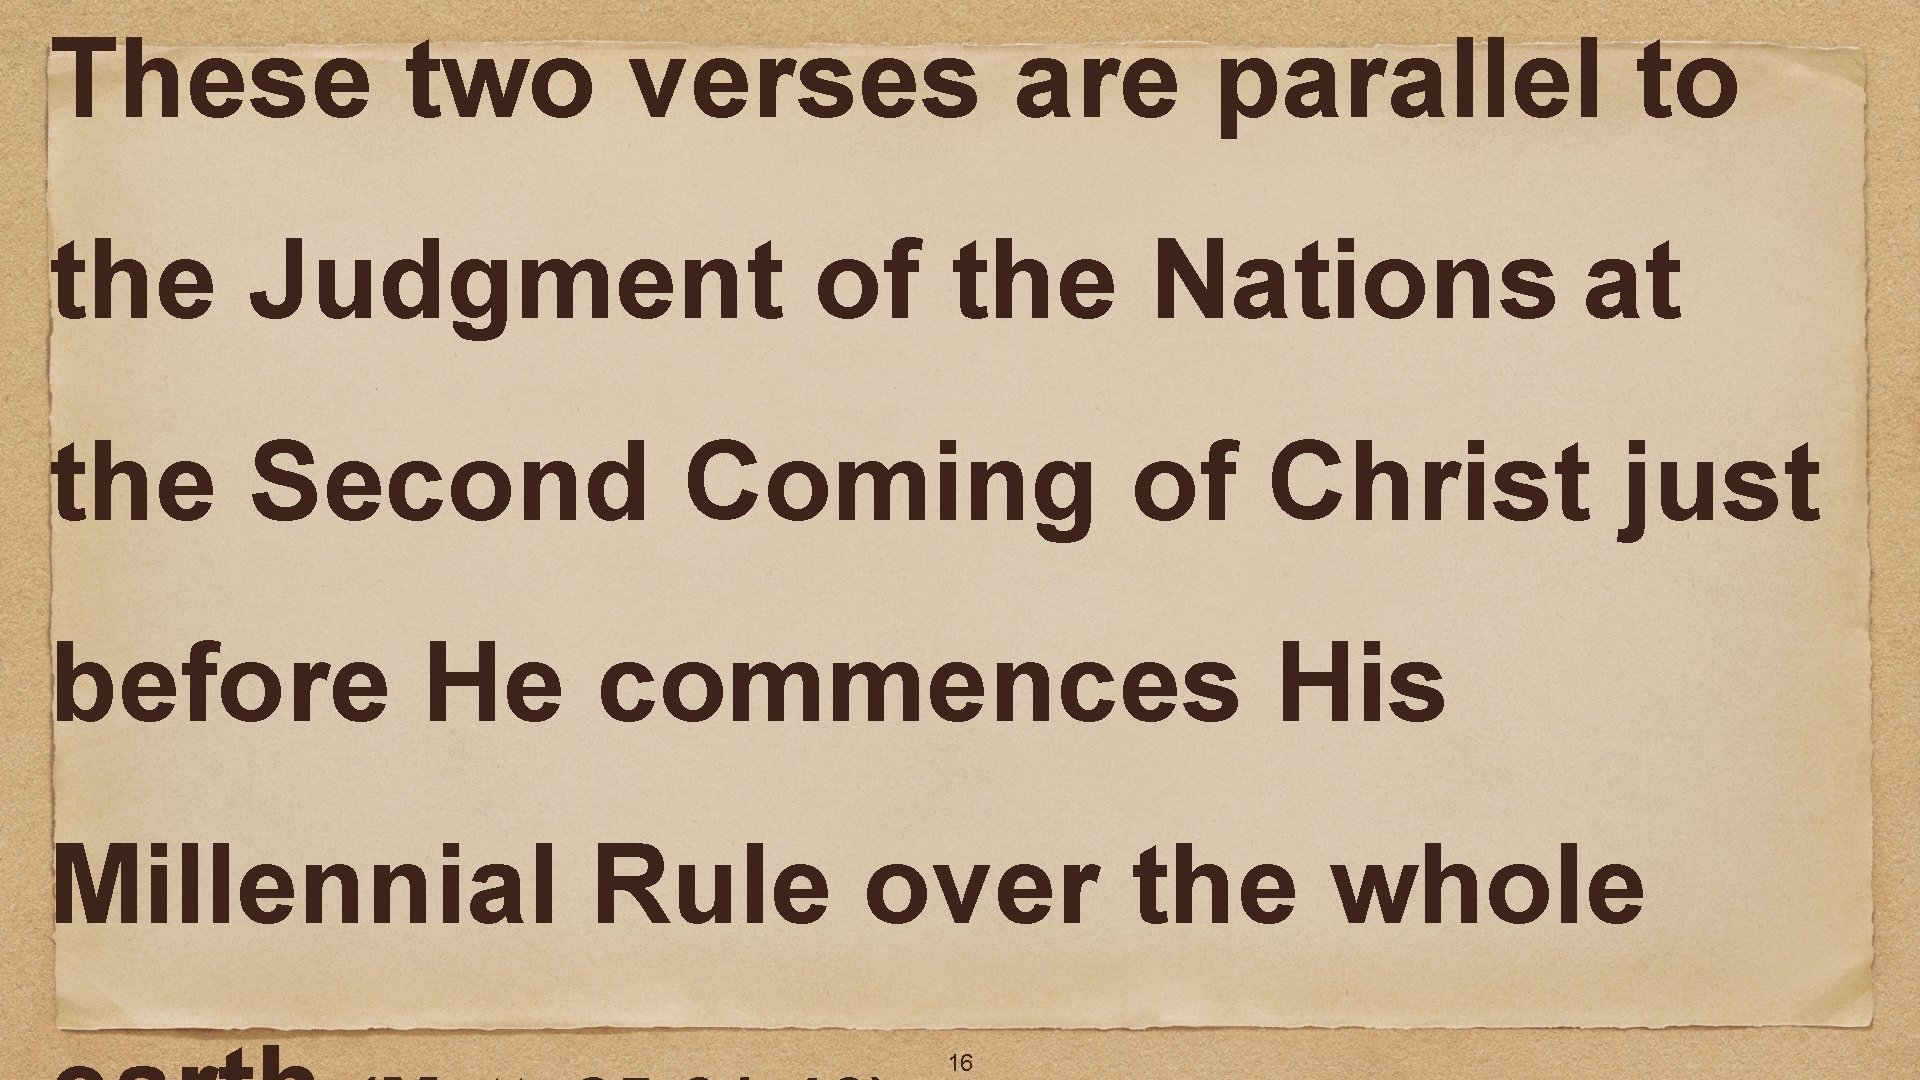 These two verses are parallel to the Judgment of the Nations at the Second